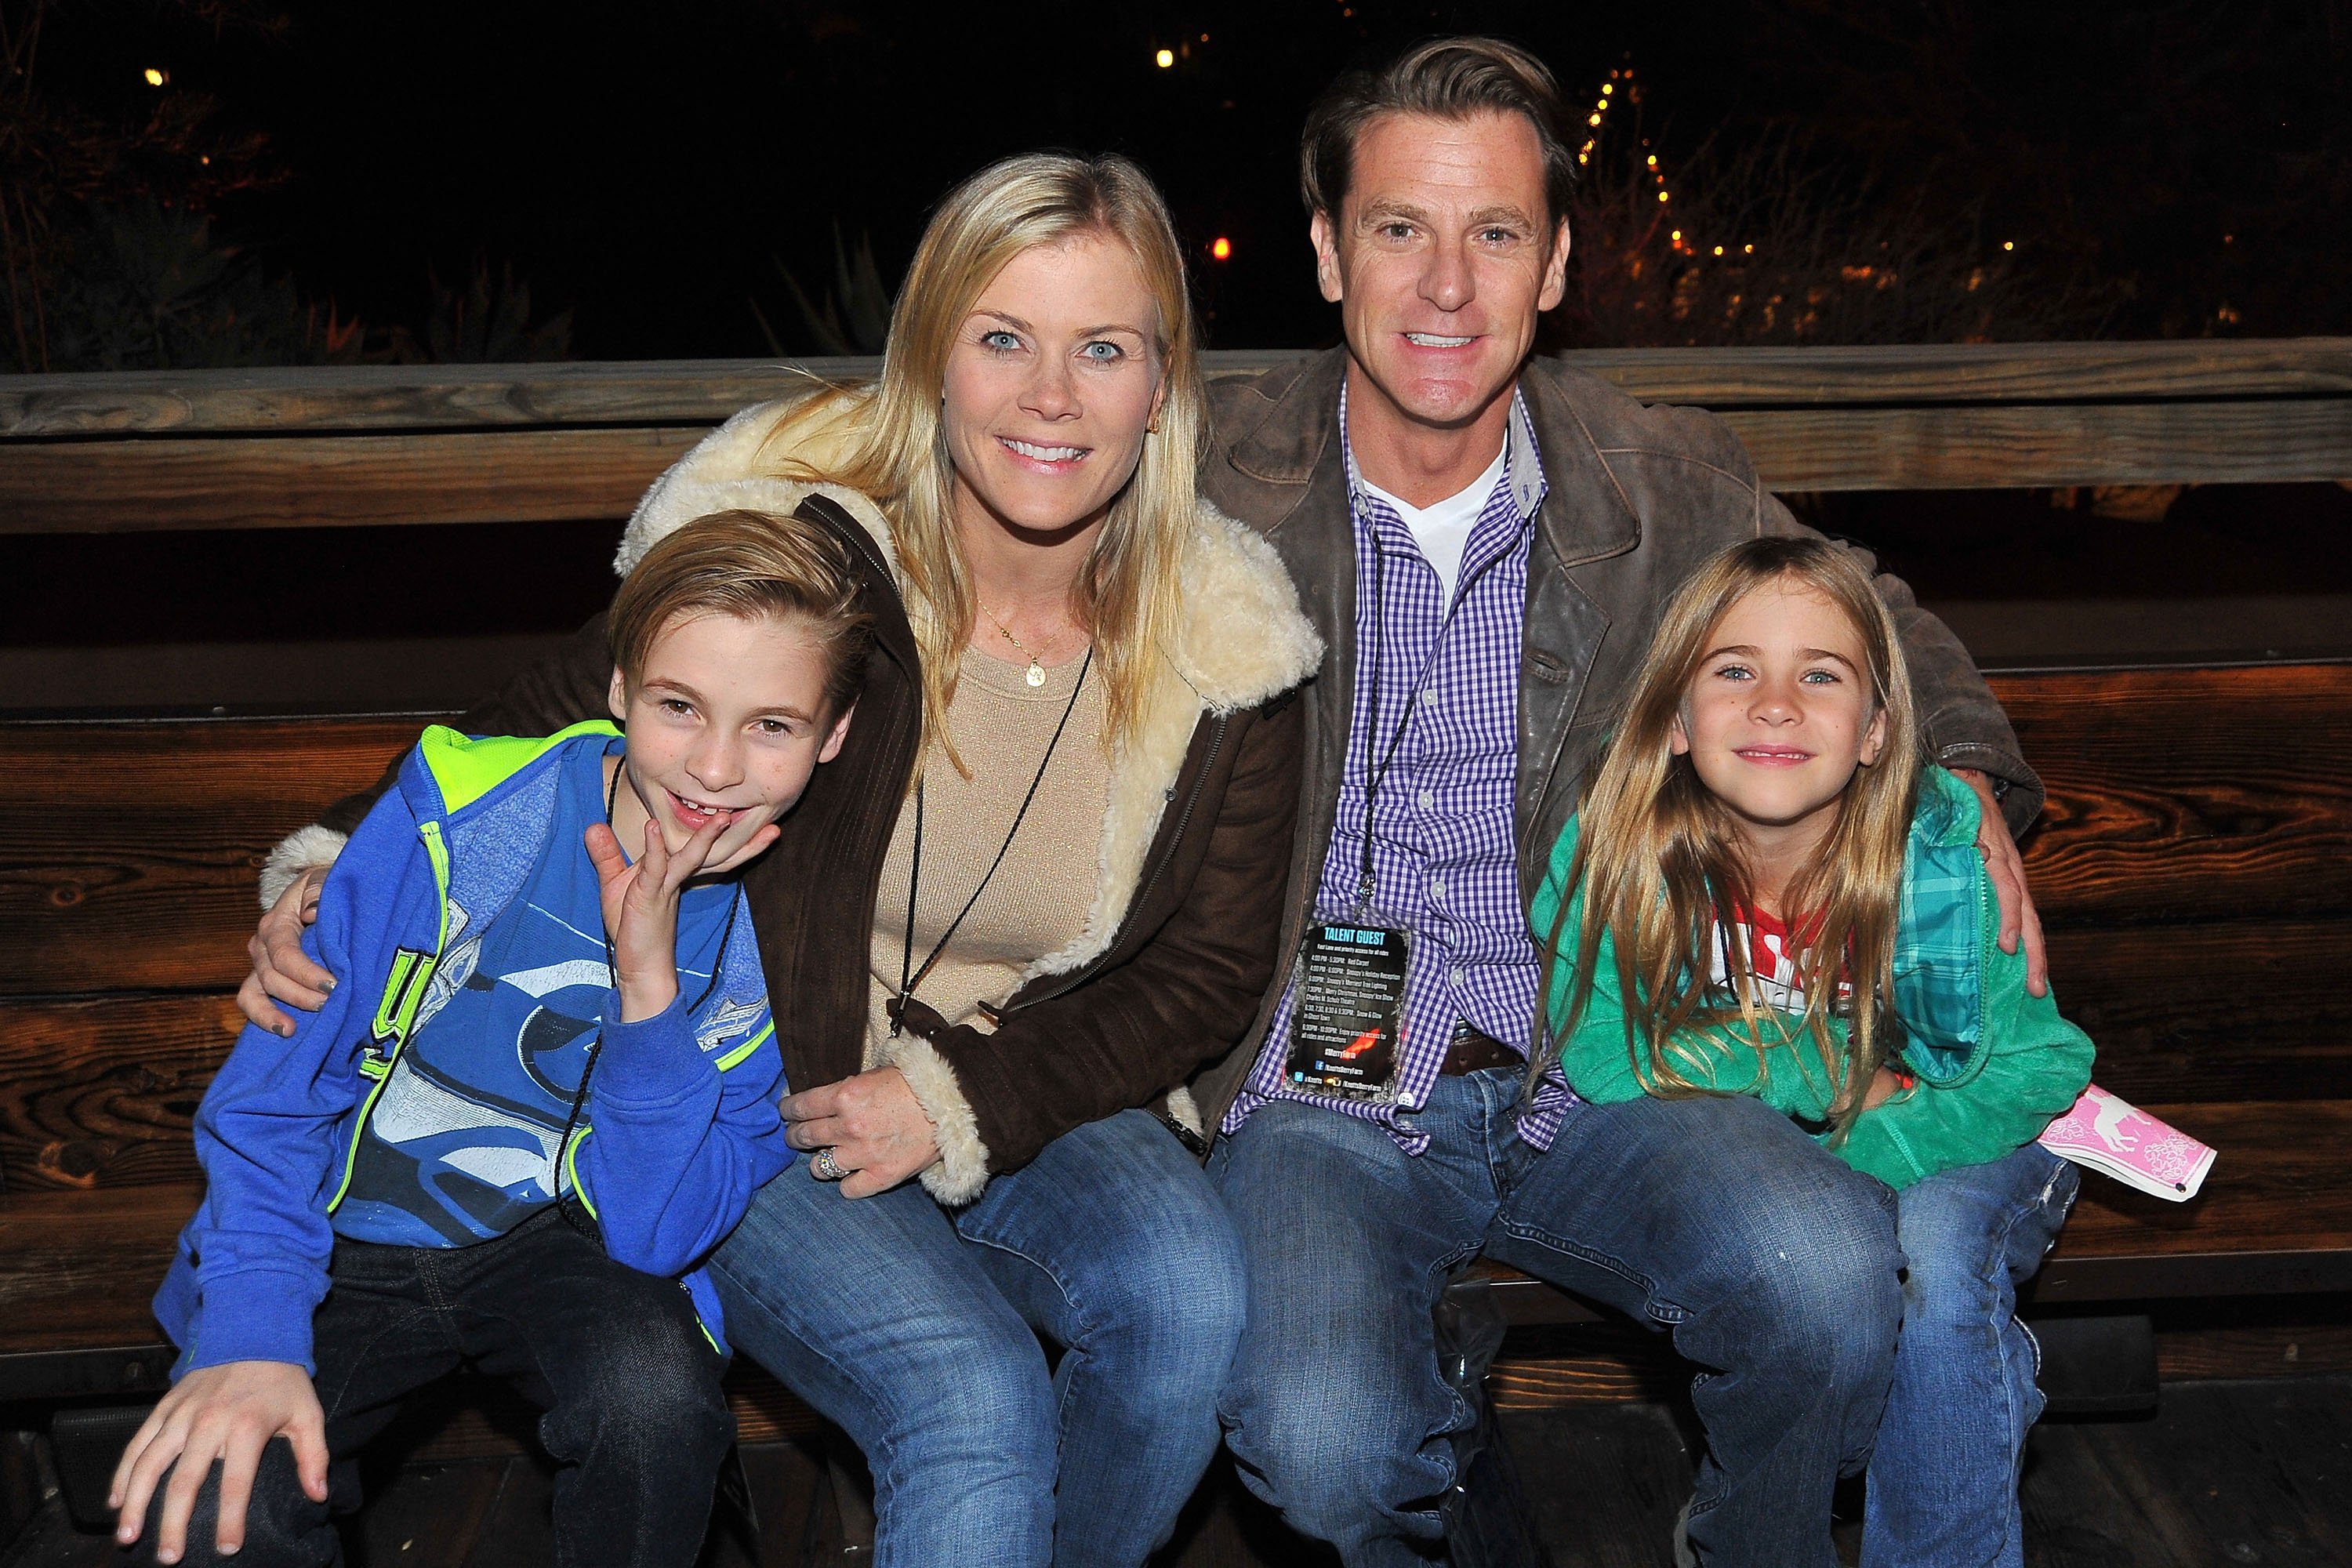 Actress Alison Sweeney, husband David Sanov and children Benjamin and Megan at Knott's Berry Farm on December 5, 2015 in Buena Park, California. | Source: Getty Images